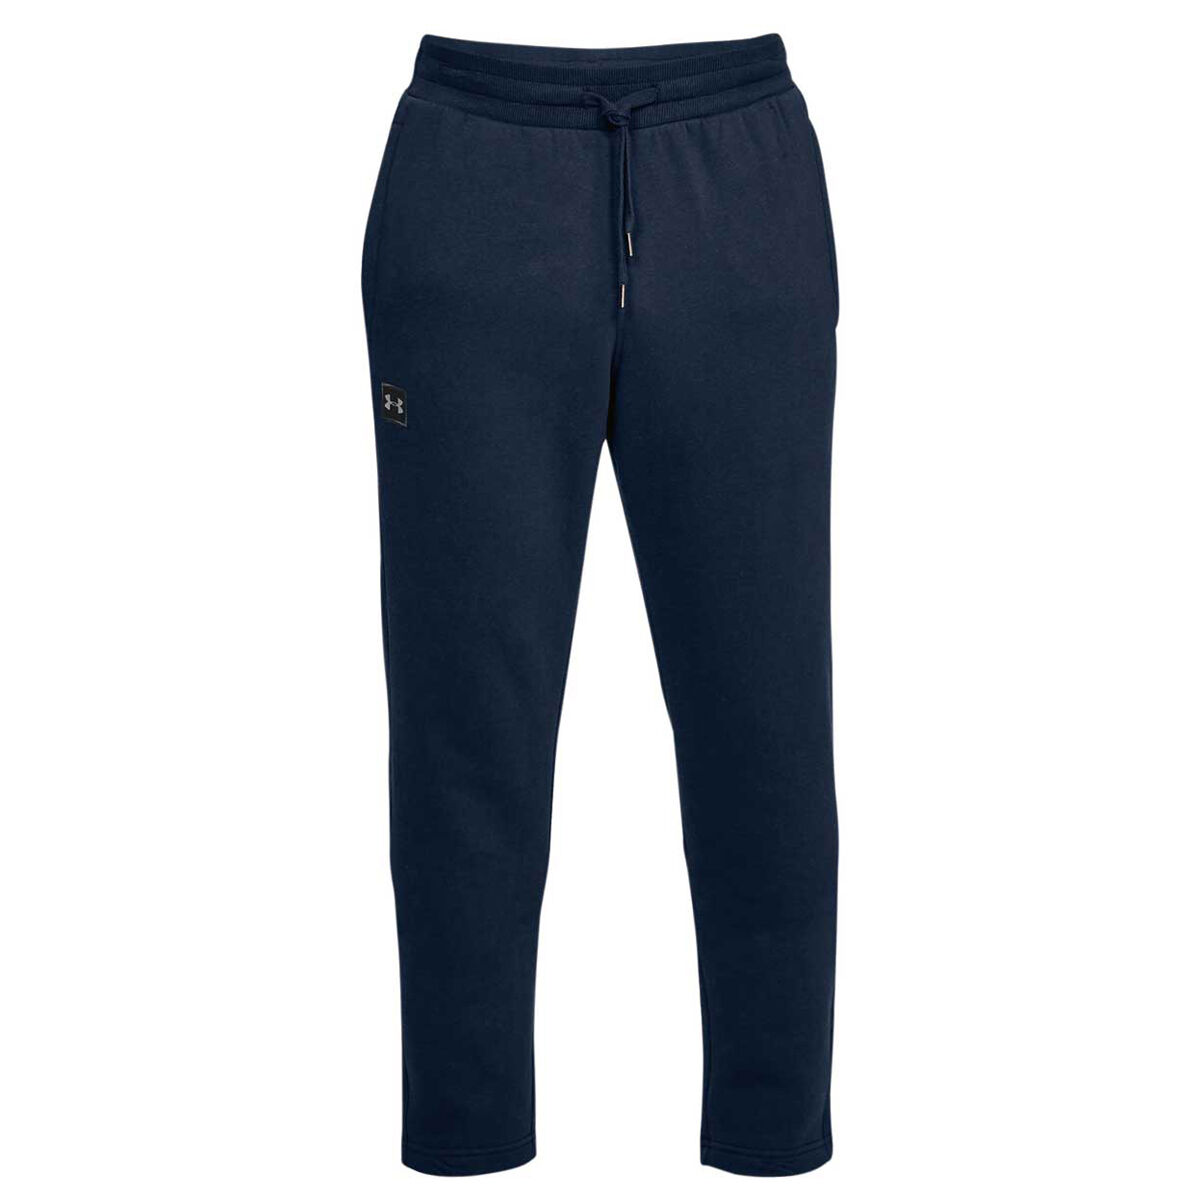 NEW Under Armour Golf Sweatpant Loose Pants Mens Size Small Blue 701C  00978744 - Mikes Golf Outlet